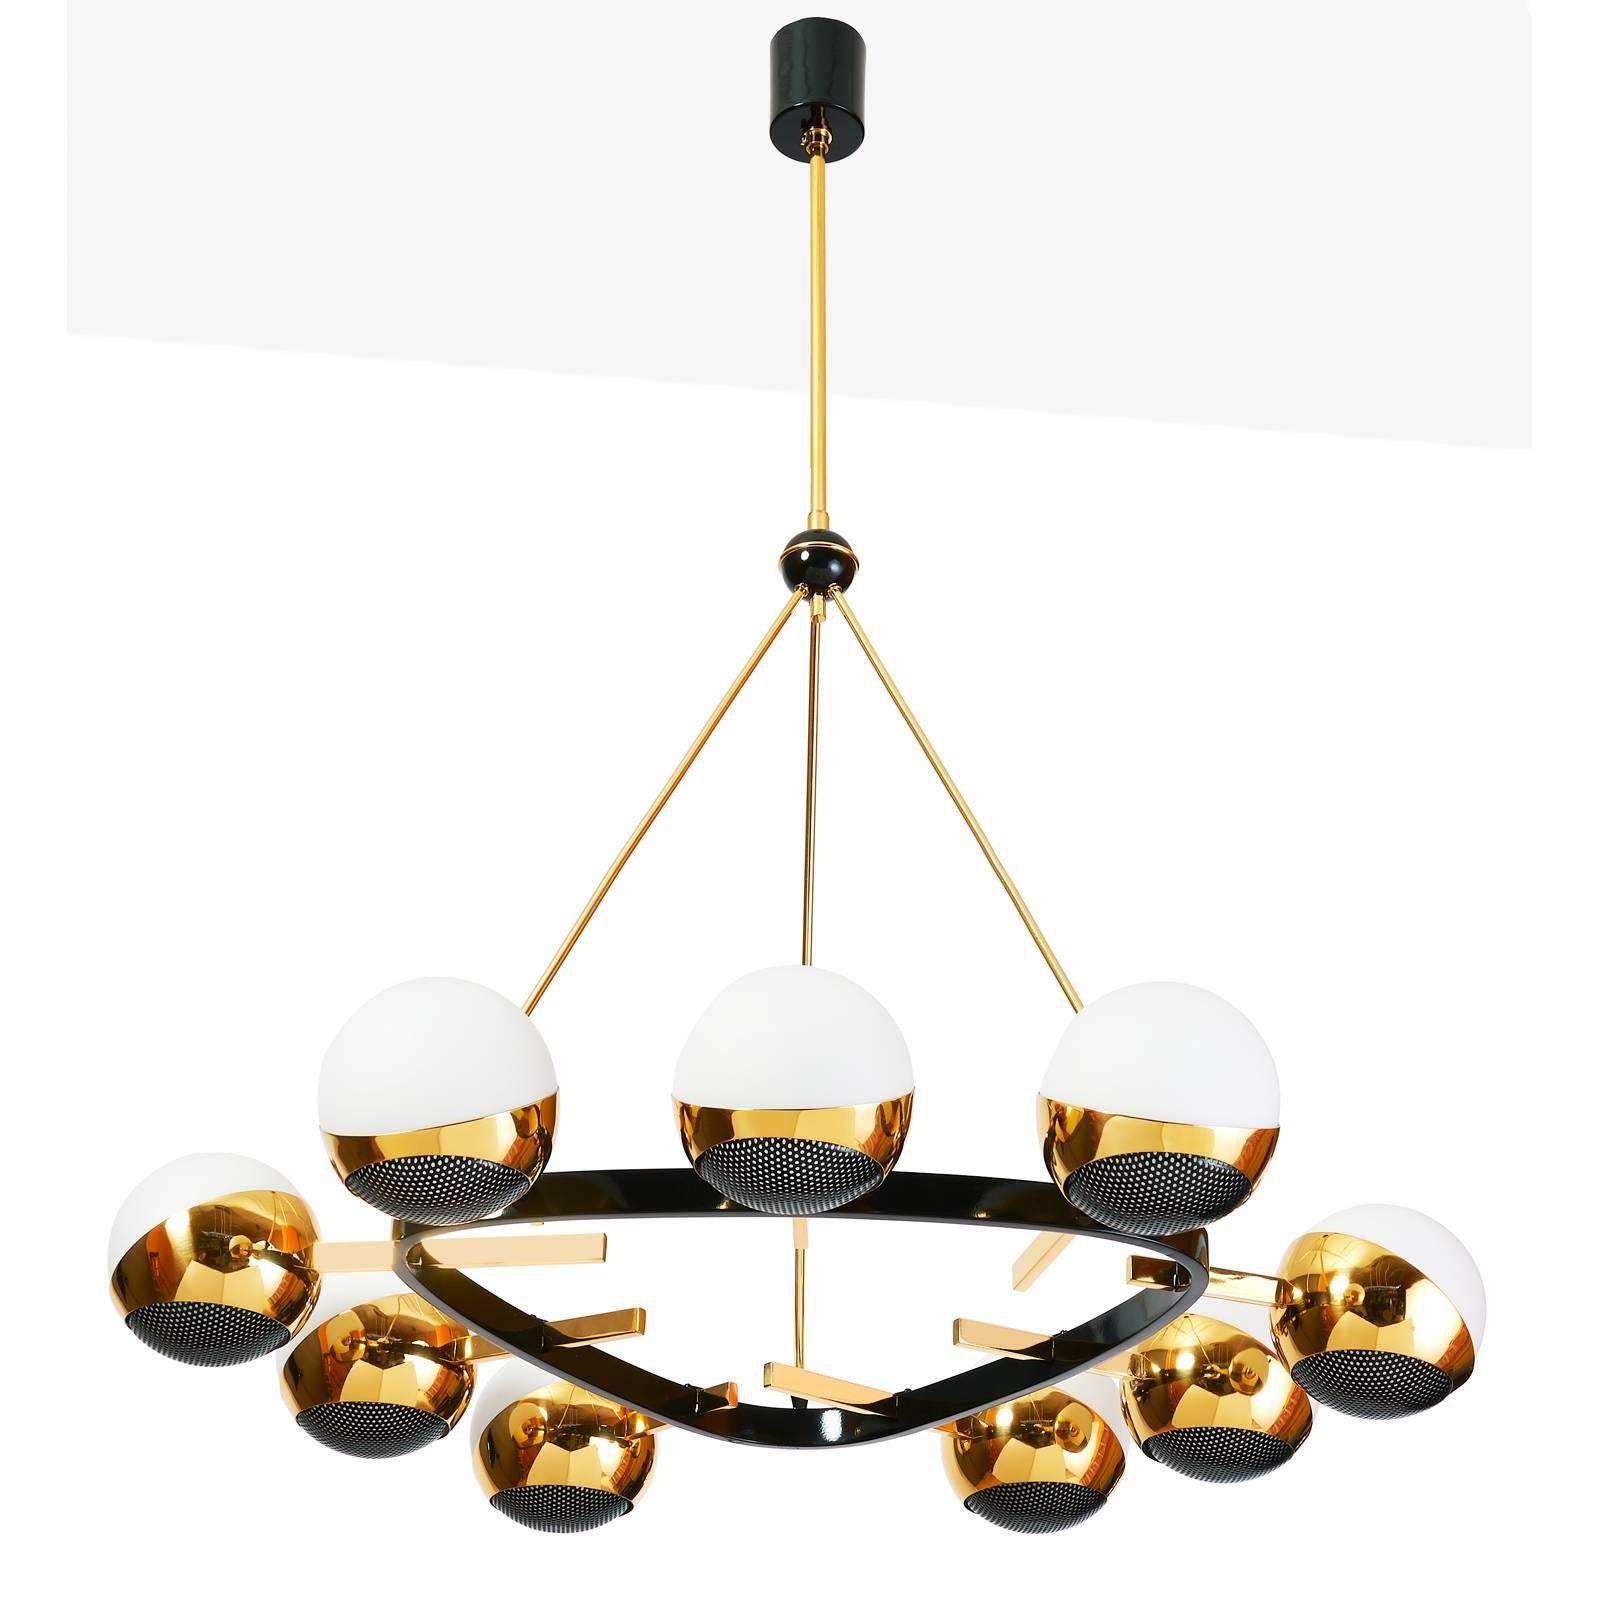 Stilnovo
Nine branch rounded triangular chandelier by Stilnovo in polished and black enameled brass, with opaline glass globes set in polished brass mounts with black enameled perforated screens. Italy, 1950s
Dimensions: 30 Diameter x 39 H as shown 